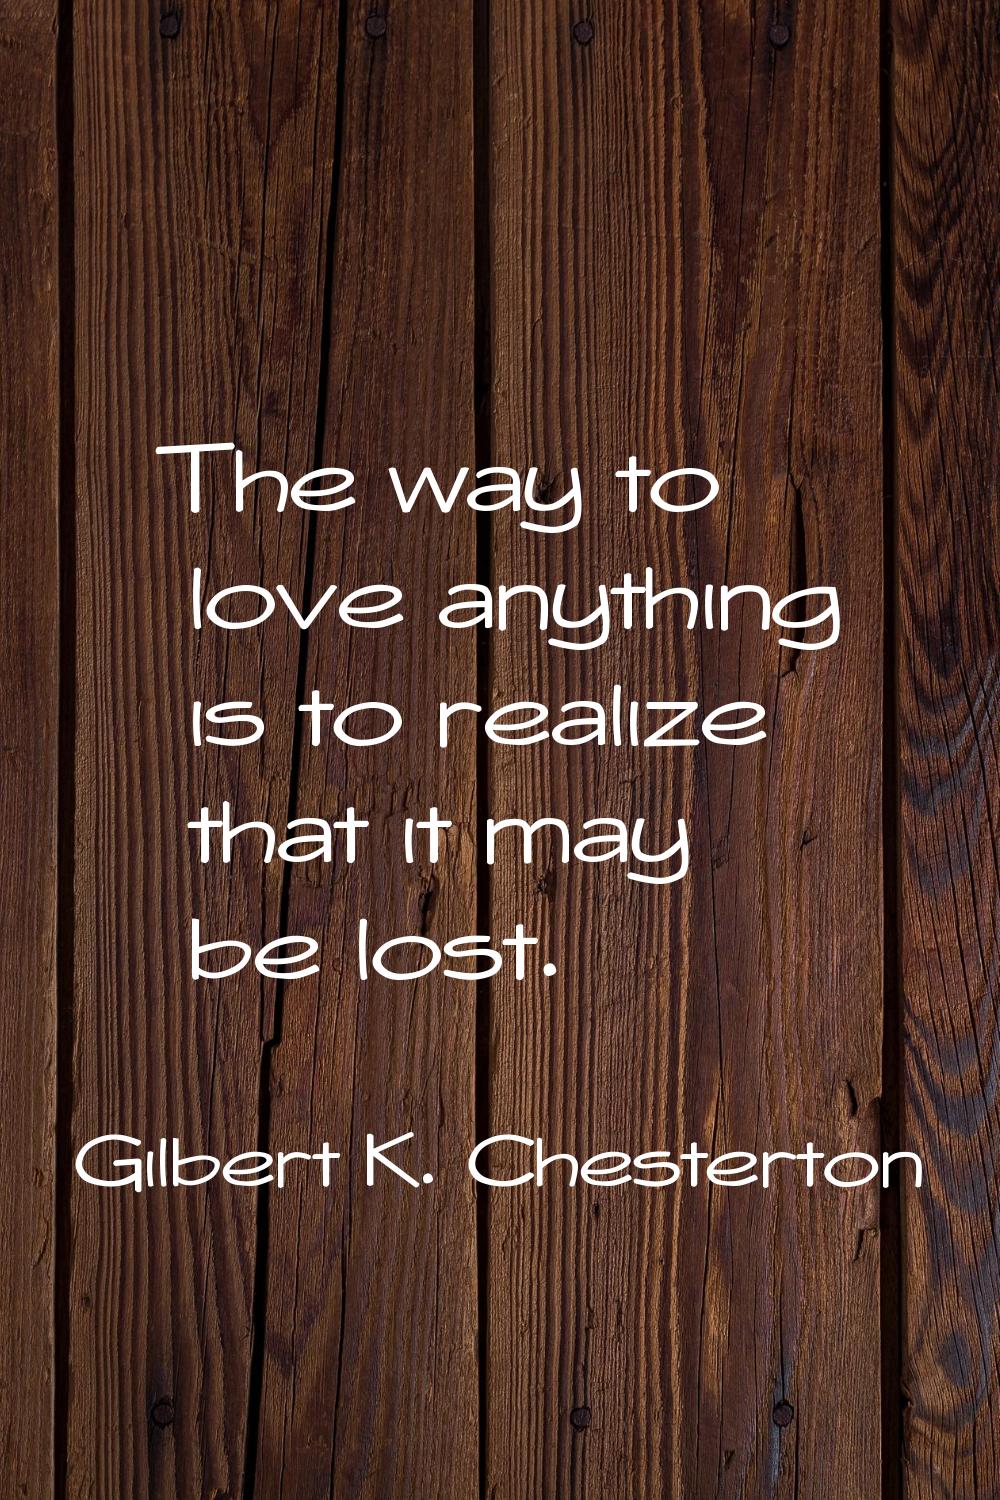 The way to love anything is to realize that it may be lost.